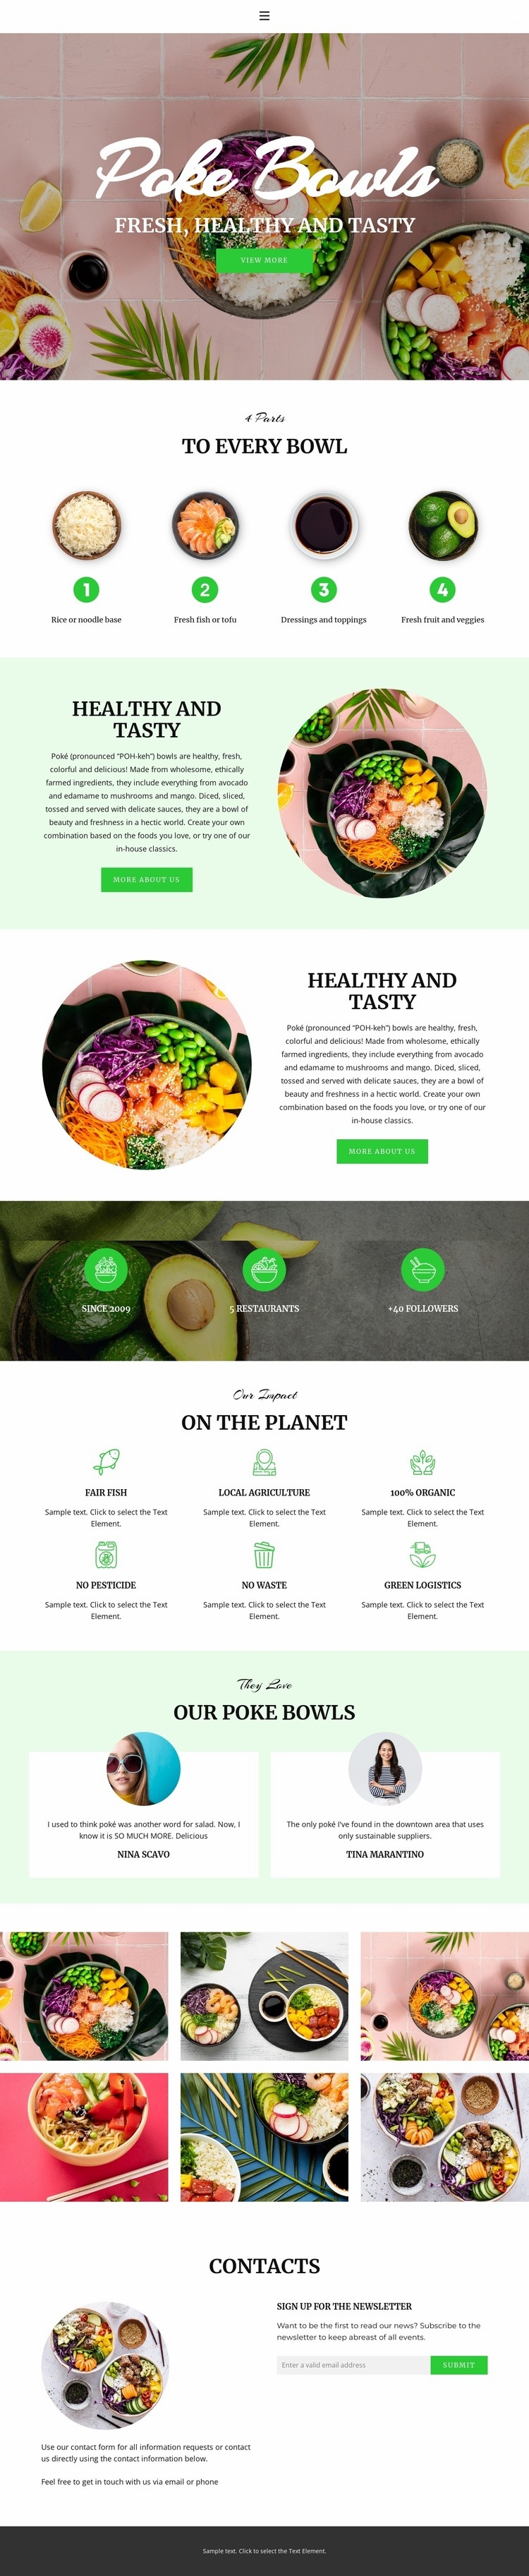 Fresh healthy and tasty Web Page Design